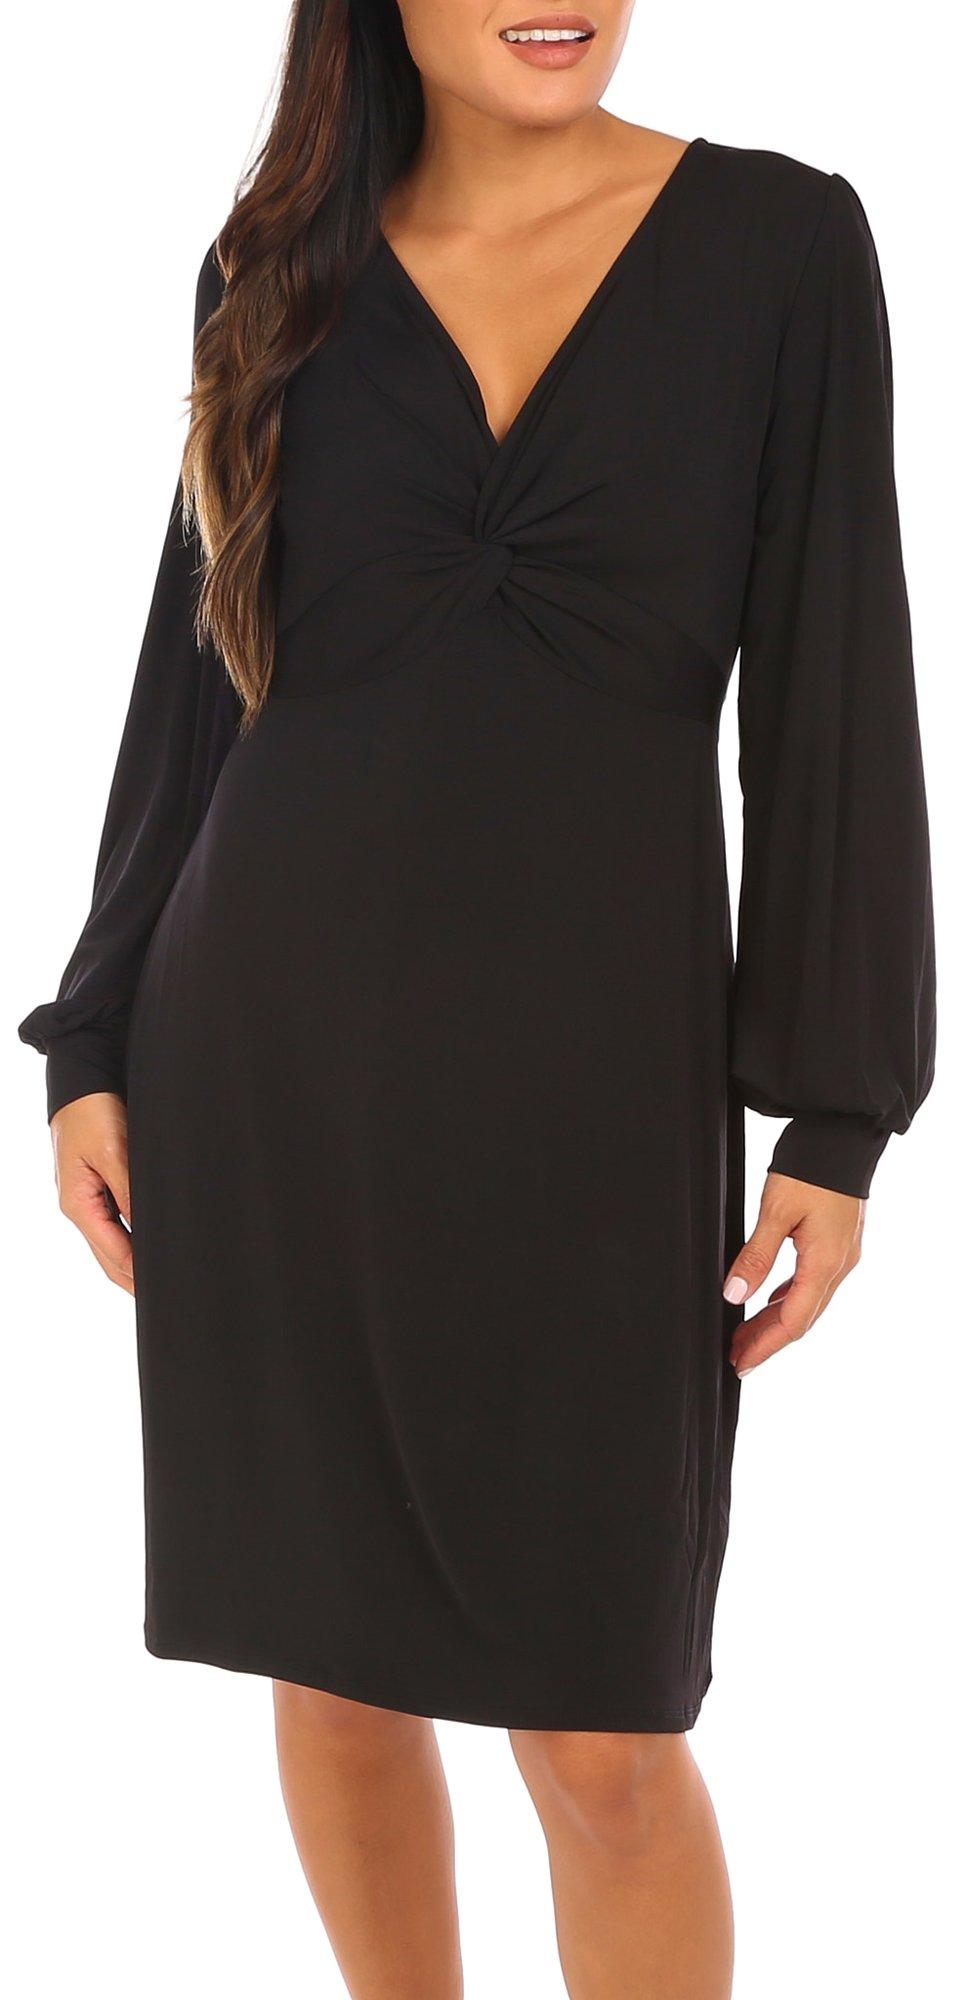 Womens Solid Long Sleeve Ruched Front Dress